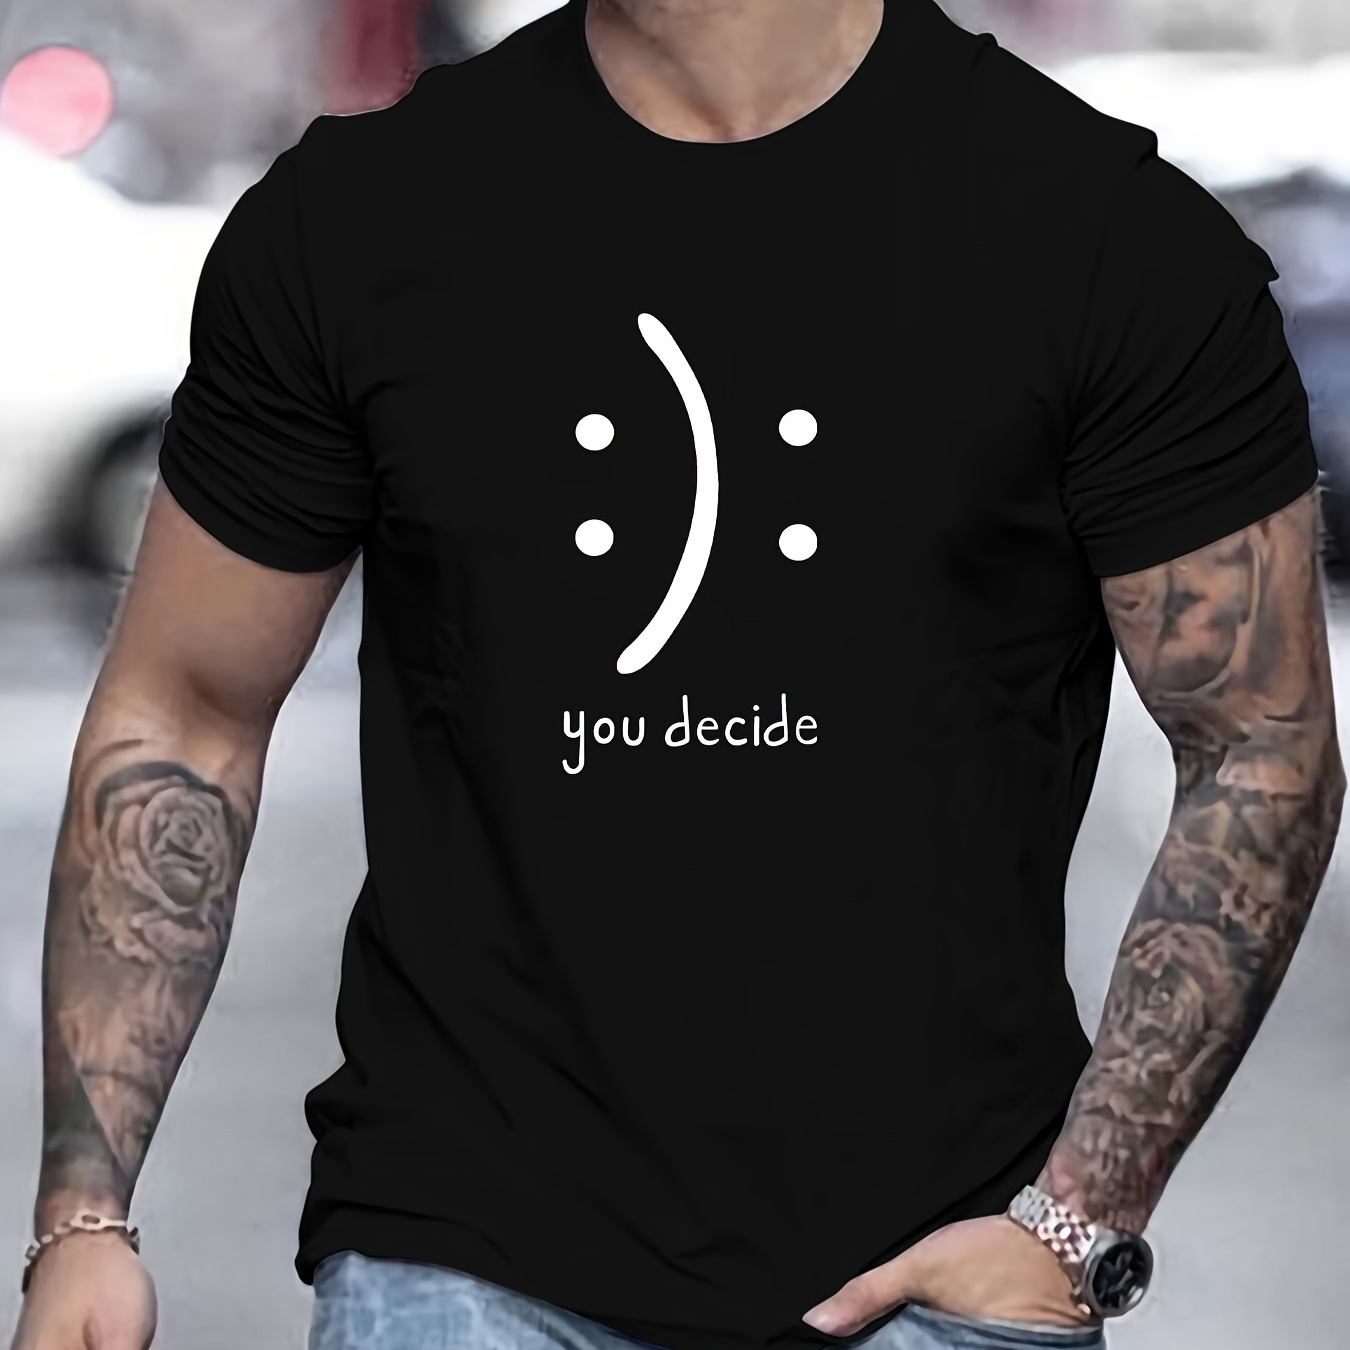 

You Decide & Smile Face Graphic Print Men's Trendy Short Sleeve T-shirts, Comfy Casual Breathable Tops For Men's Fitness Training, Jogging, Outdoor Activities